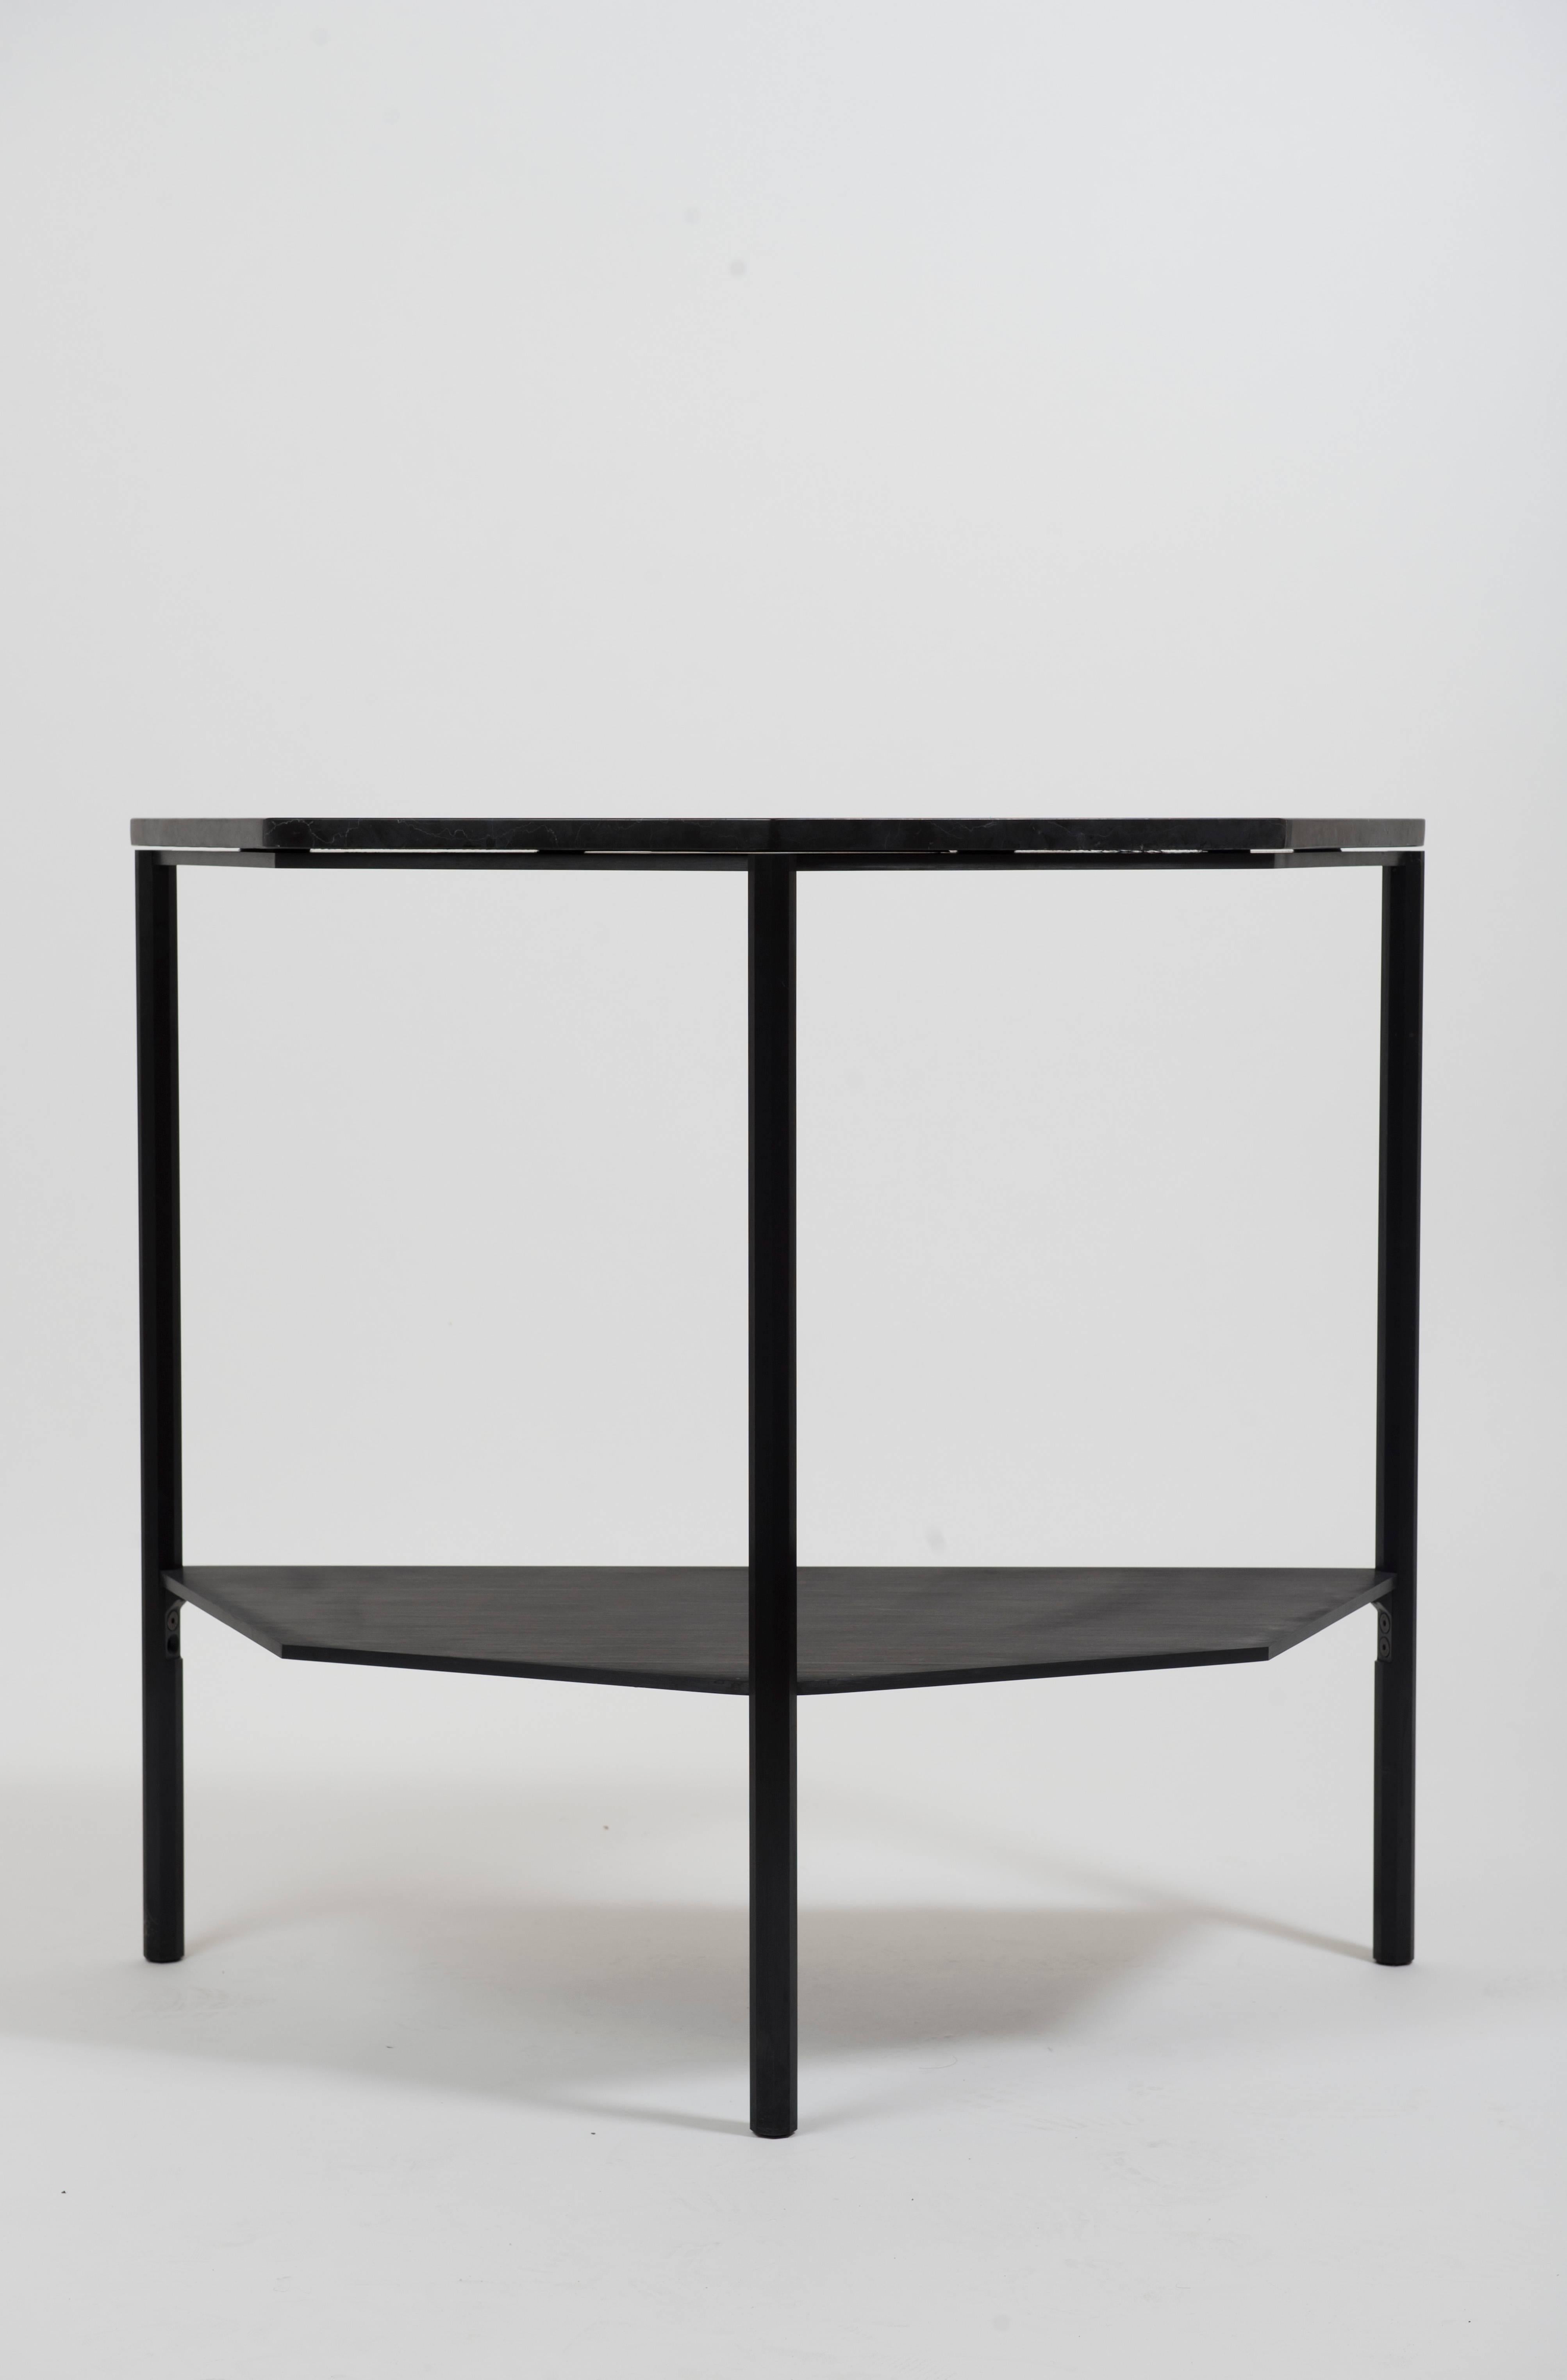 This half-octagon shaped console is a contemporary take on the demilune entry console. Octagon-shaped legs are cnc-milled out of square aluminium solid bar, and hand brushed and anodized in satin black. Legs are connected via custom milled aluminium